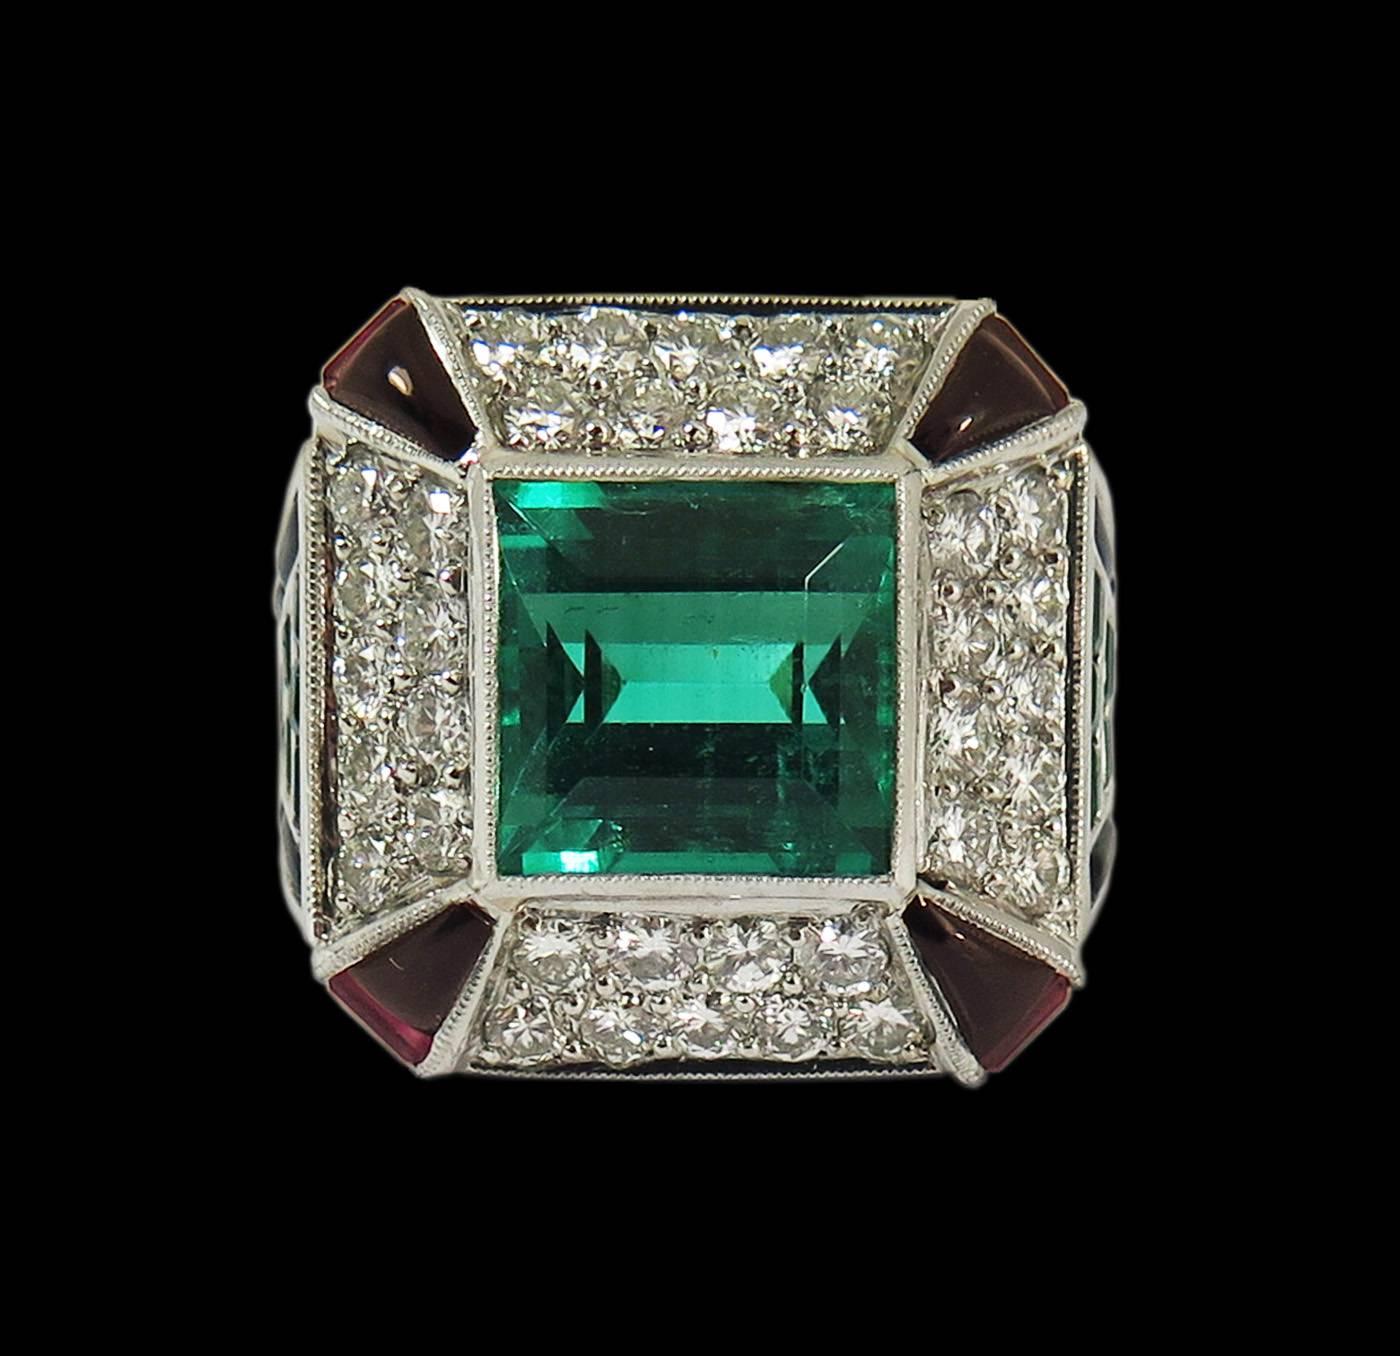 A very fine and rare Art Deco platinum ring a 4.0 ct emerald cut Colombian emerald of rich and deep green. The emerald is AGL certified as being of Colombian origin, with insignificant traditional treatment. 

Surrounding the emerald on each side